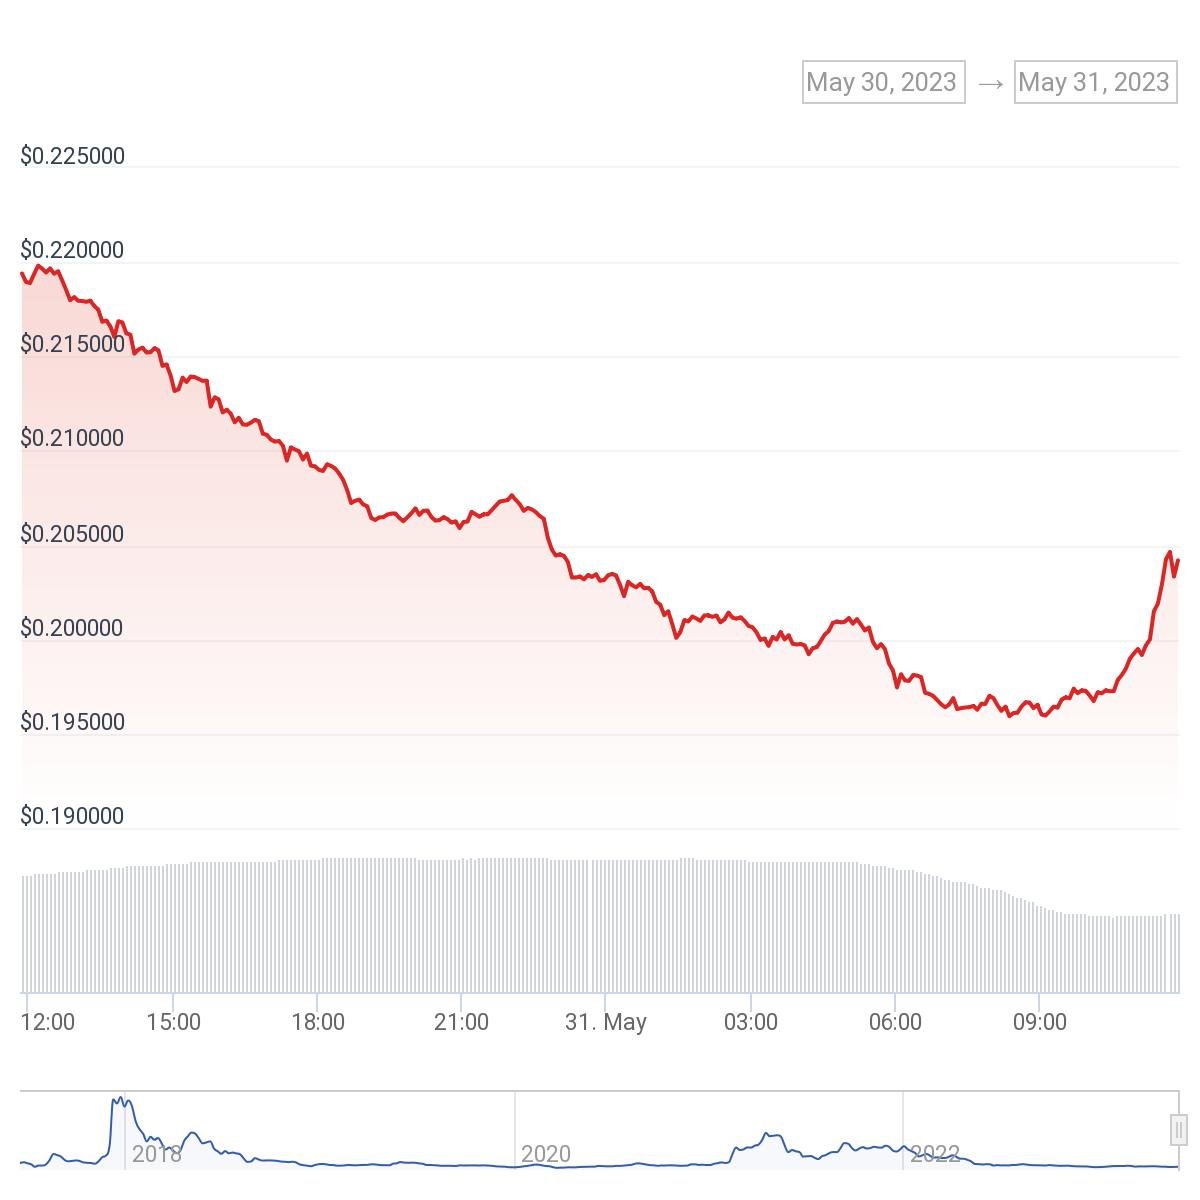 IOTA is down by over 10% as bitcoin and altcoins struggle  - 1